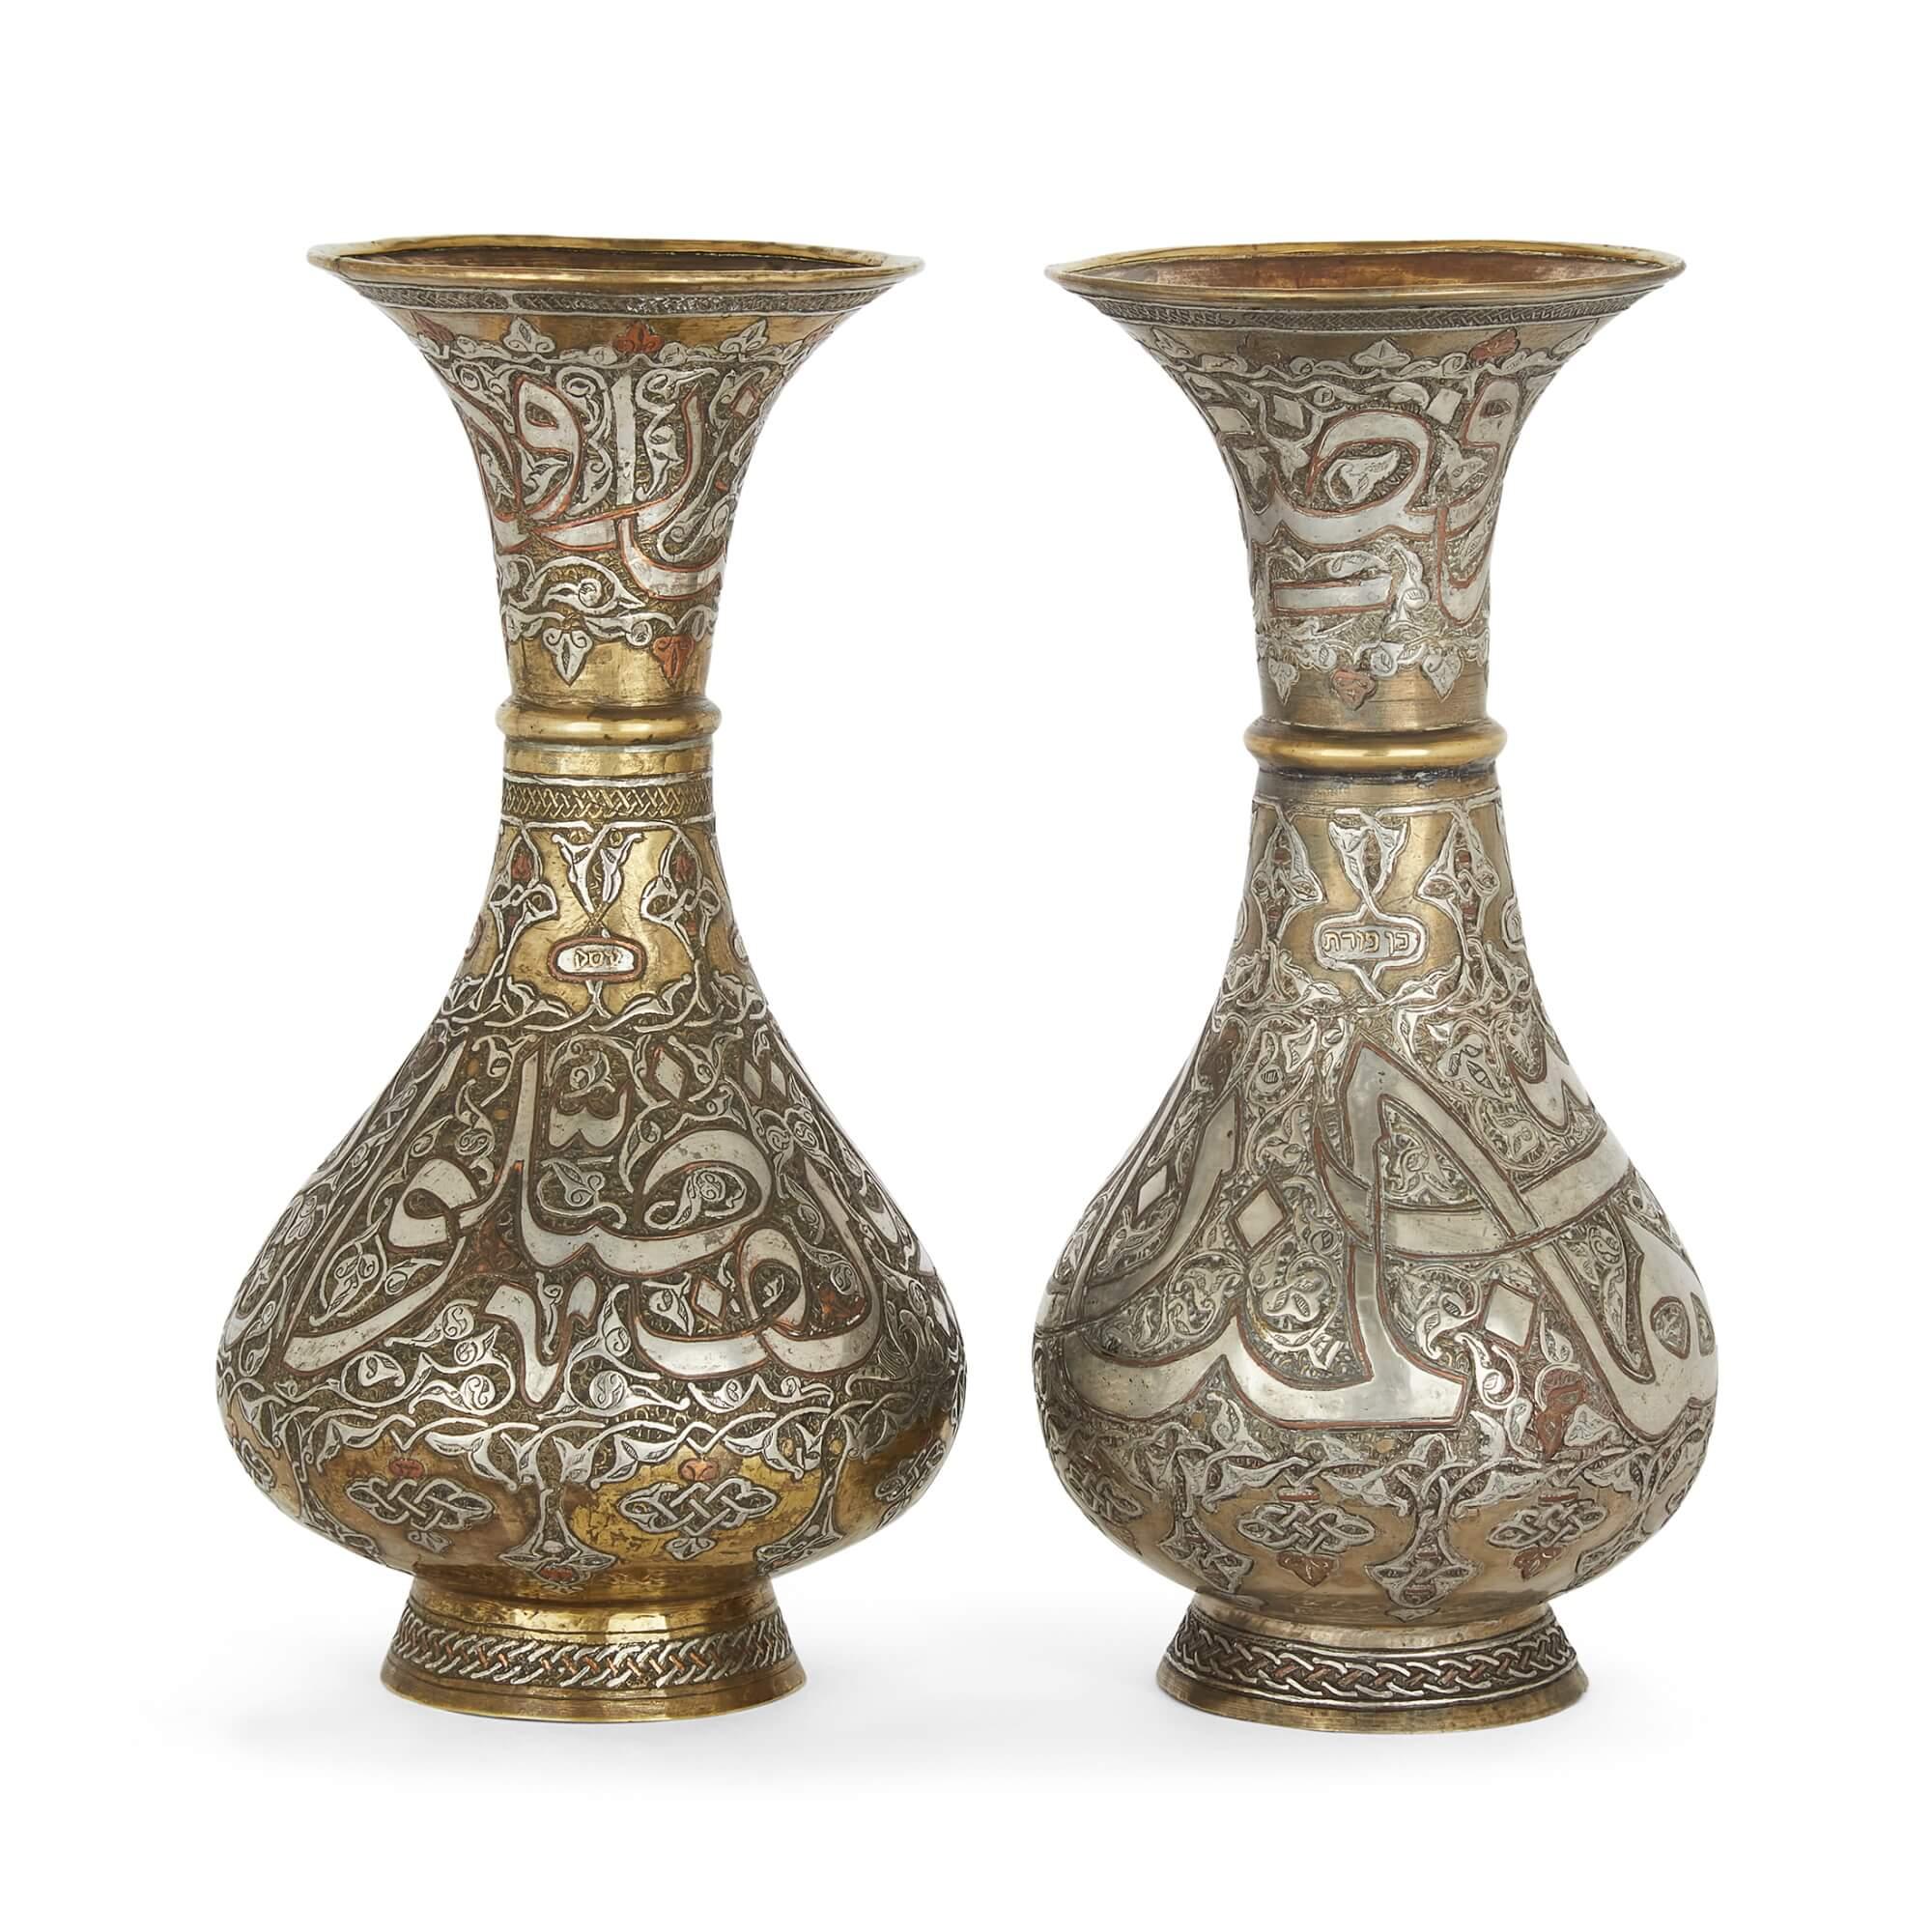 A pair of brass Syrian Mamluk revival vases with silver and copper inlay
Syrian, 20th Century
28cm high x 14cm in diameter.

These excellent vases were made in the Mamluk revival, during which inspiration was drawn heavily from the Mamluk